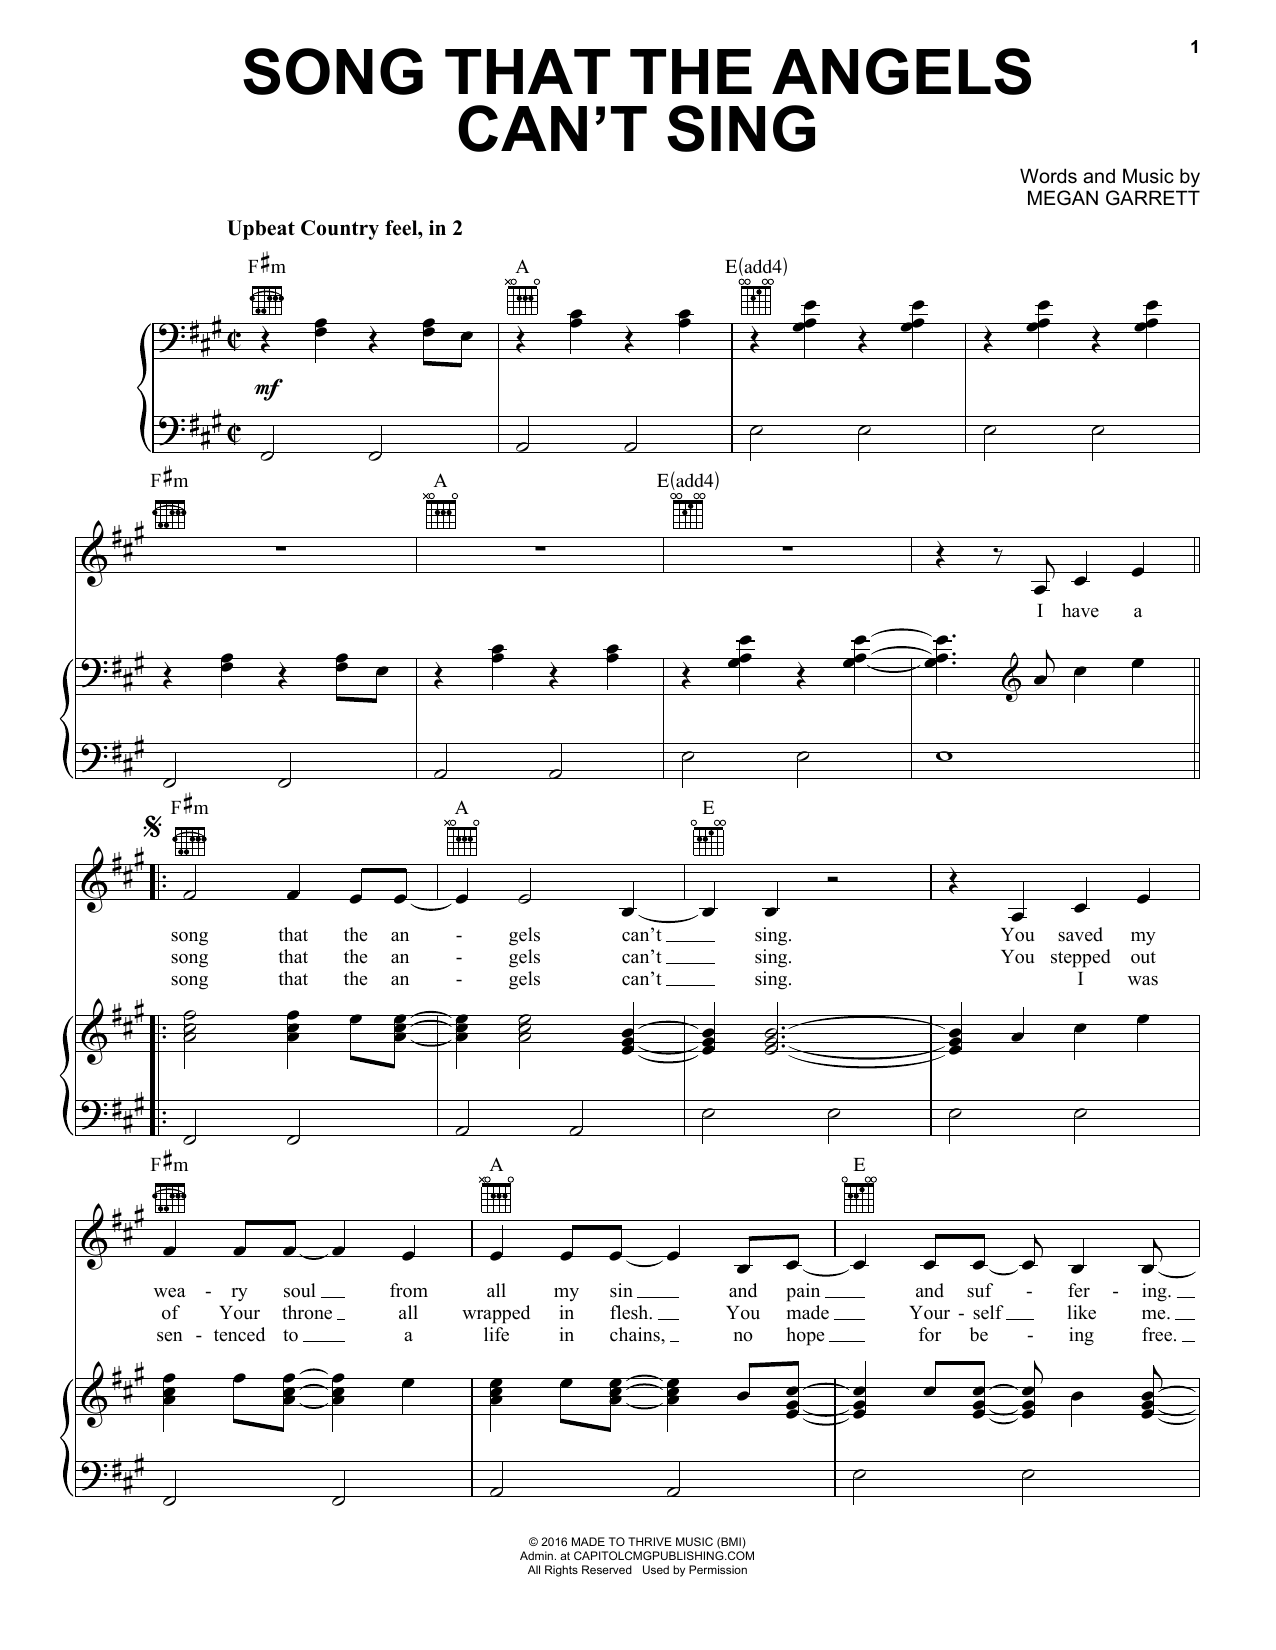 Download Casting Crowns Song That The Angels Can't Sing Sheet Music